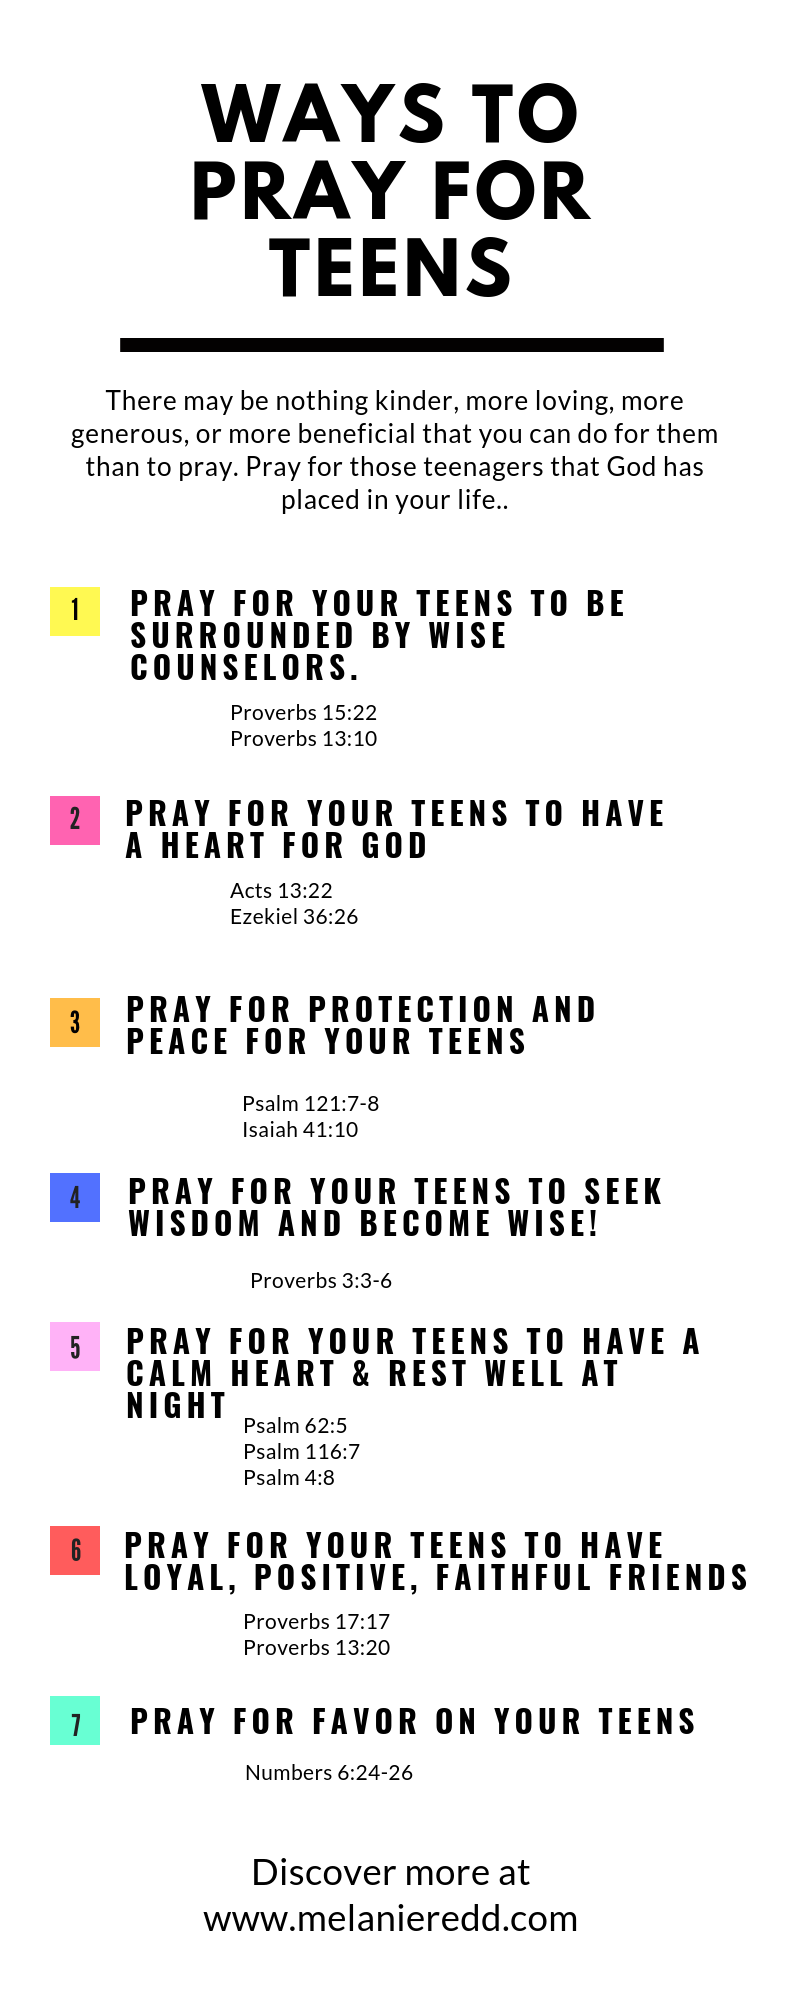 Parenting teenagers can be challenging! There are some things you can do to build the relationship. One is to pray for your teens. Here are some beautiful scriptures you can use to lift up your kids and grandkids. #prayers #prayingforteens #prayforteens #prayerideas